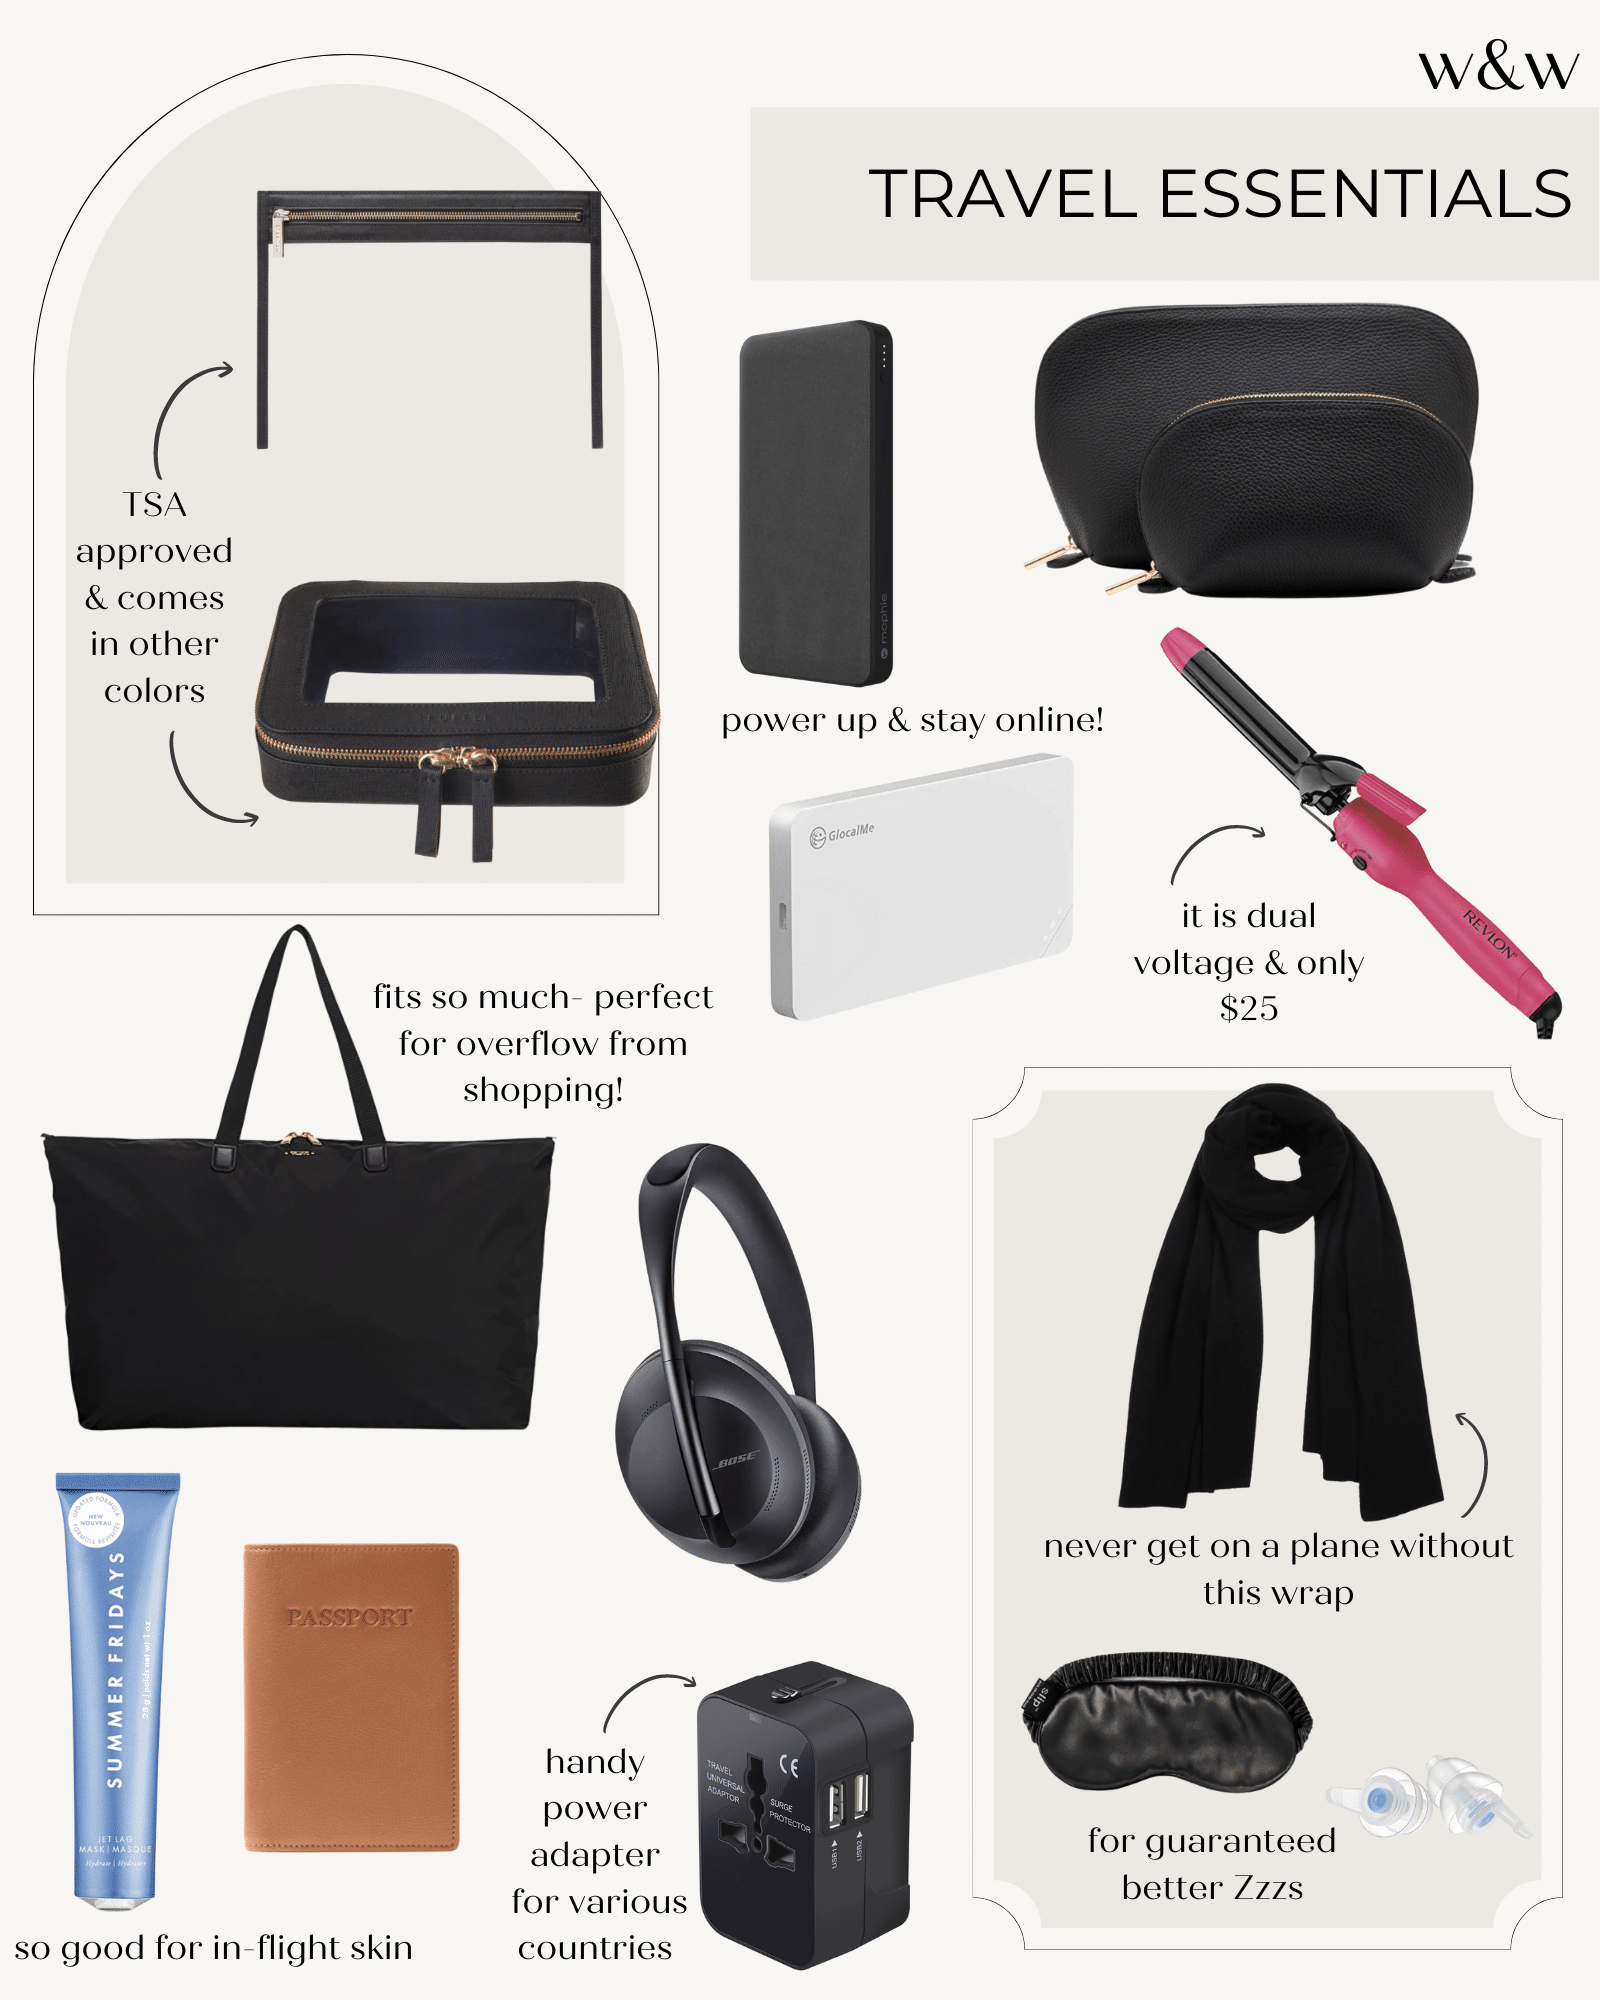 Travel Essentials wit & whimsy